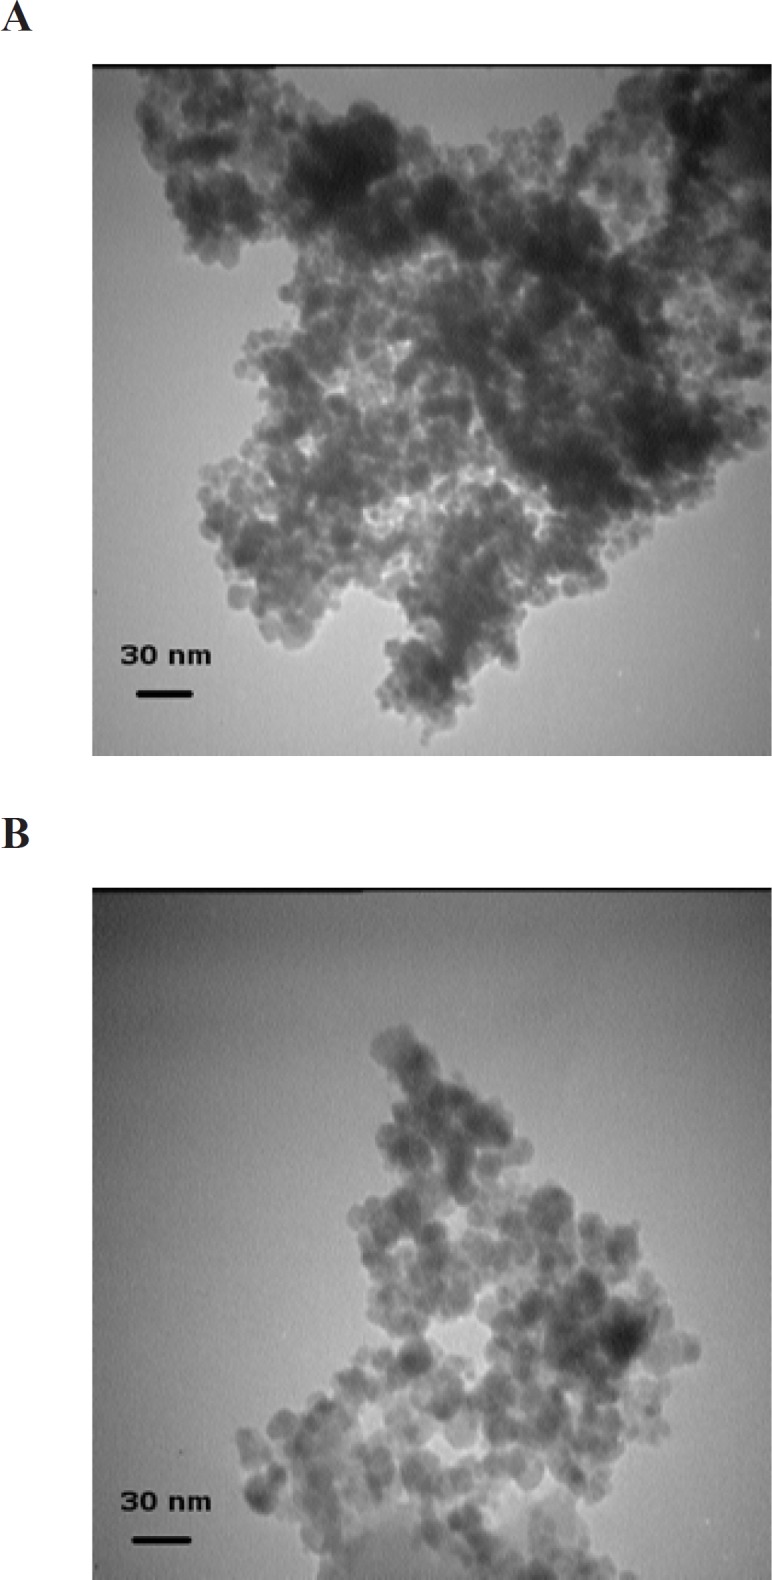 TEM micrographs of Fe3O4 (A) and Fe3O4@SiO2 (B) NPs. (A) Fe3O4 NPs were prepared by FeCl2 and FeCl3 coprecipitation under alkaline conditions. (B) Fe3O4@SiO2 NPs were prepared using the method described in the Experimental section (initial TEOS concentration 0.1 % v/v